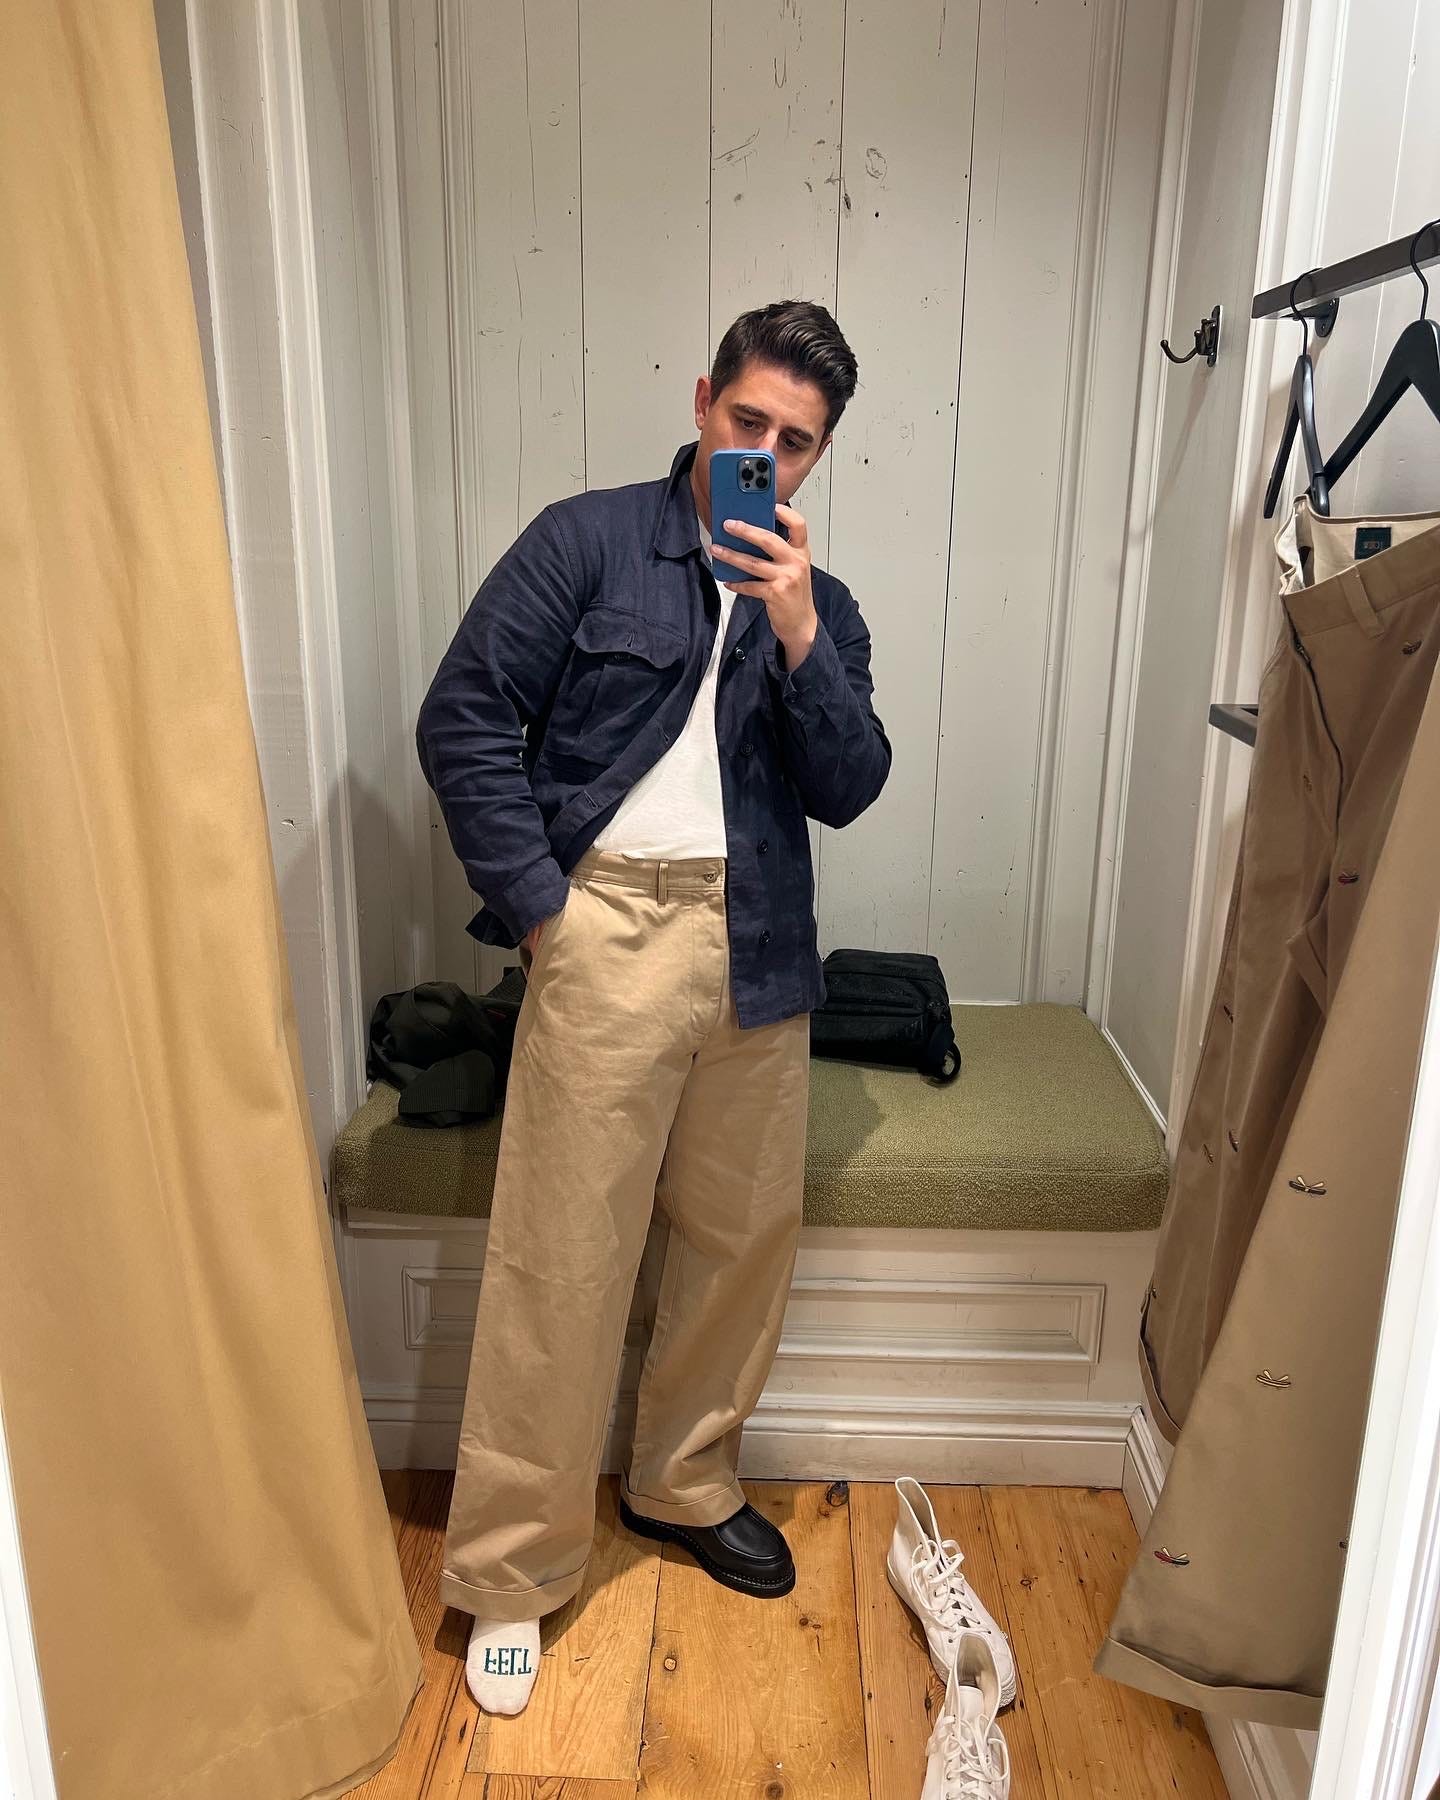 I Tested J.Crew's New Giant Fit Chinos - JAKE WOOLF